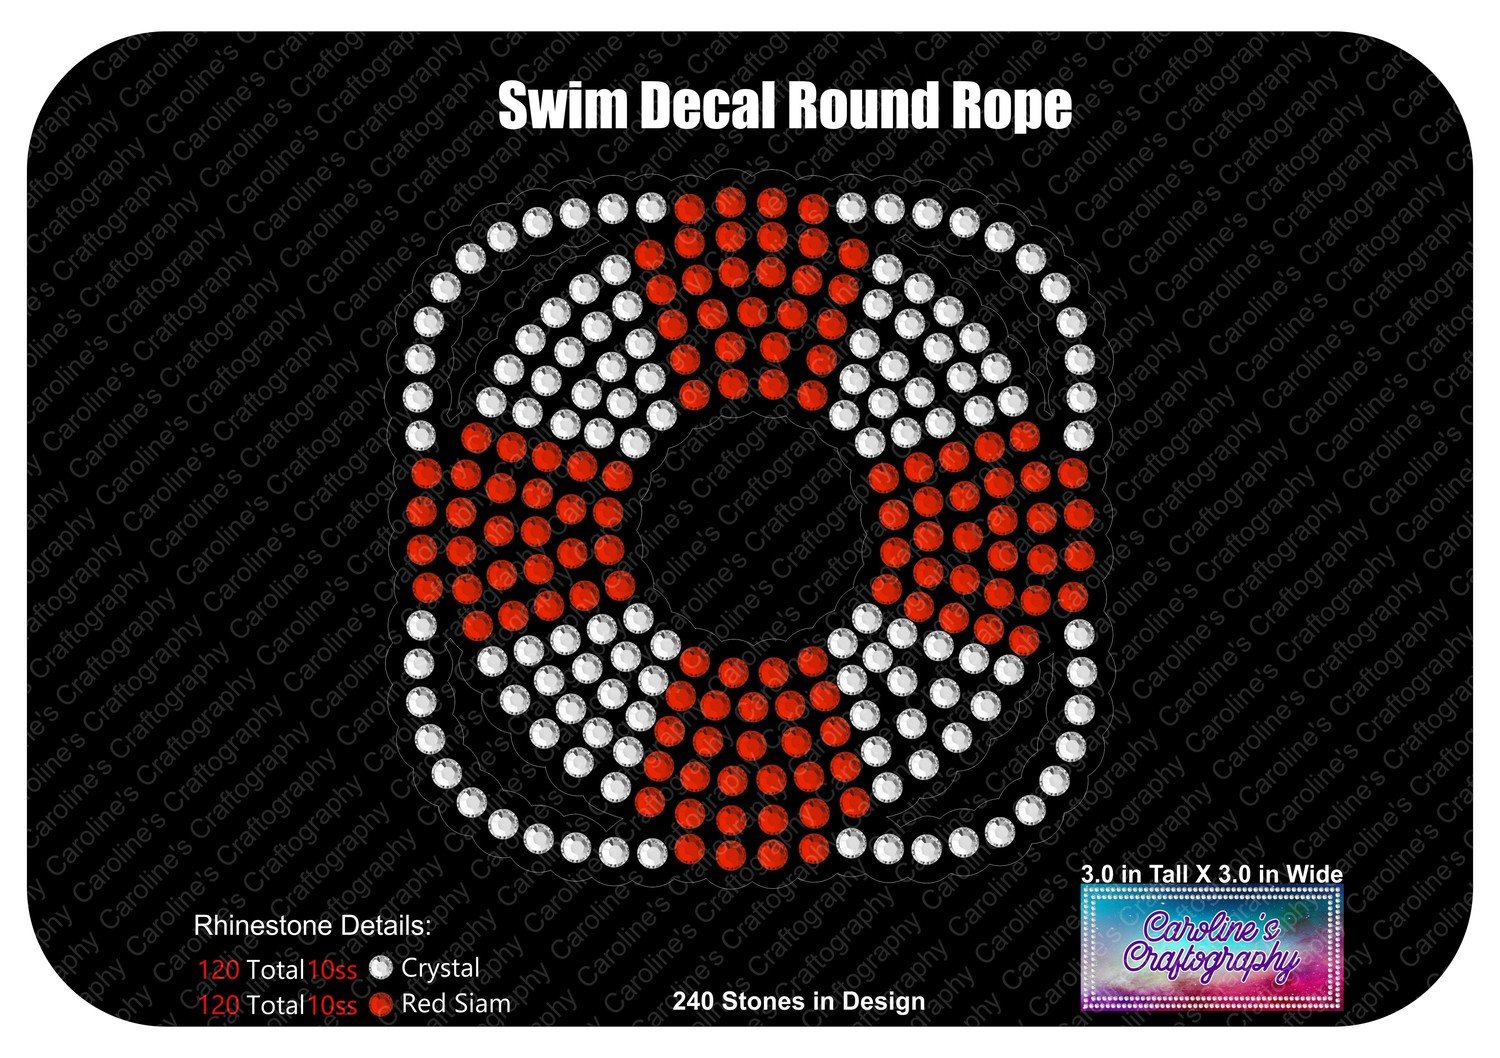 Swim Life Preserver Round with Rope Decal